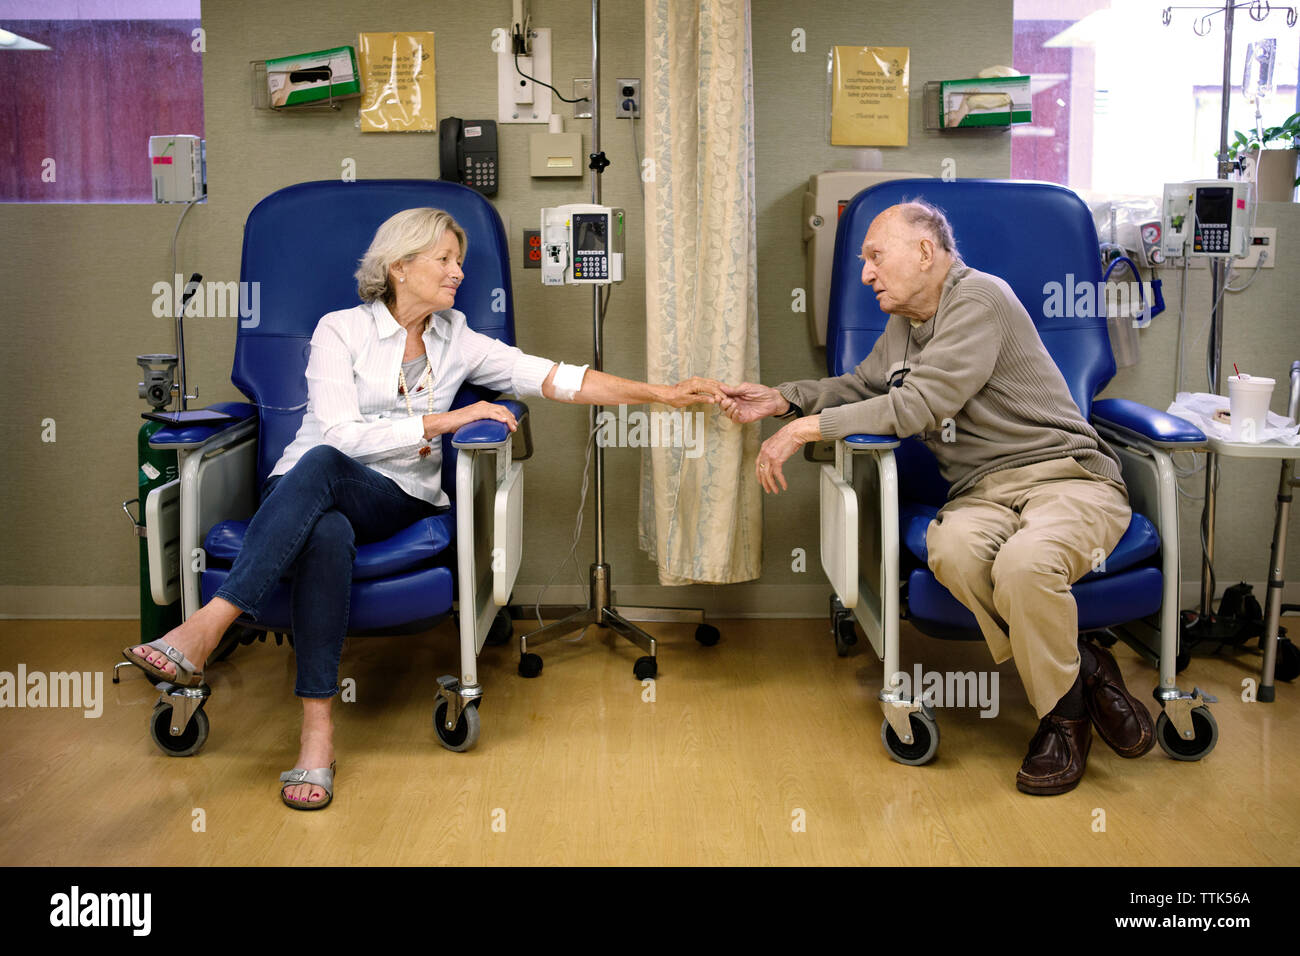 Senior couple holding hands while sitting on chairs in hospital Stock Photo